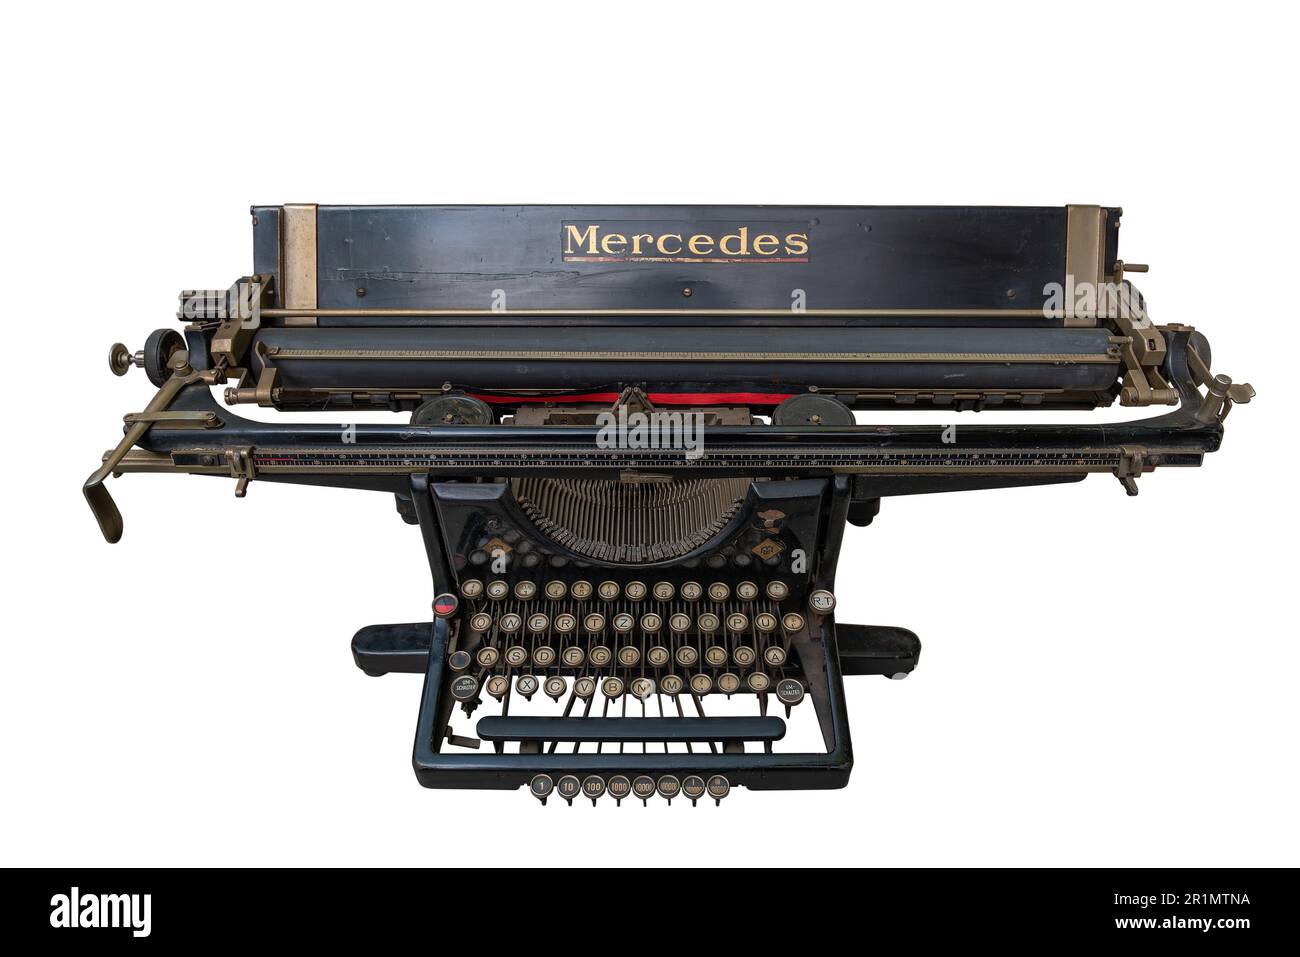 Vintage mechanical typewriter from the past isolated against a white background Stock Photo